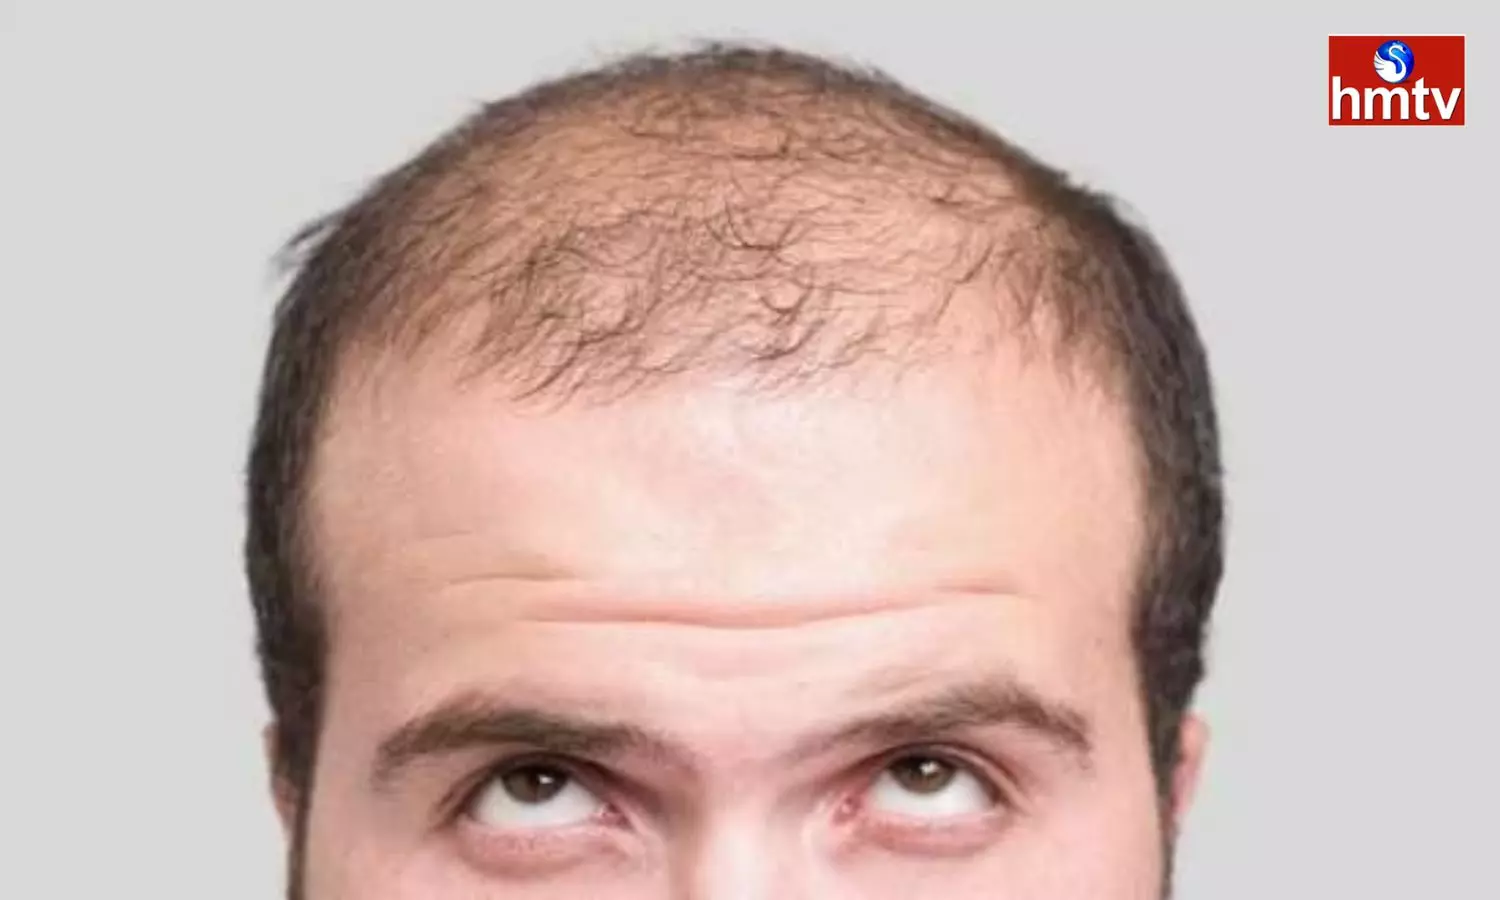 Deficiency Of Zinc In The Body Leads To Baldness Many People Do Not Know This